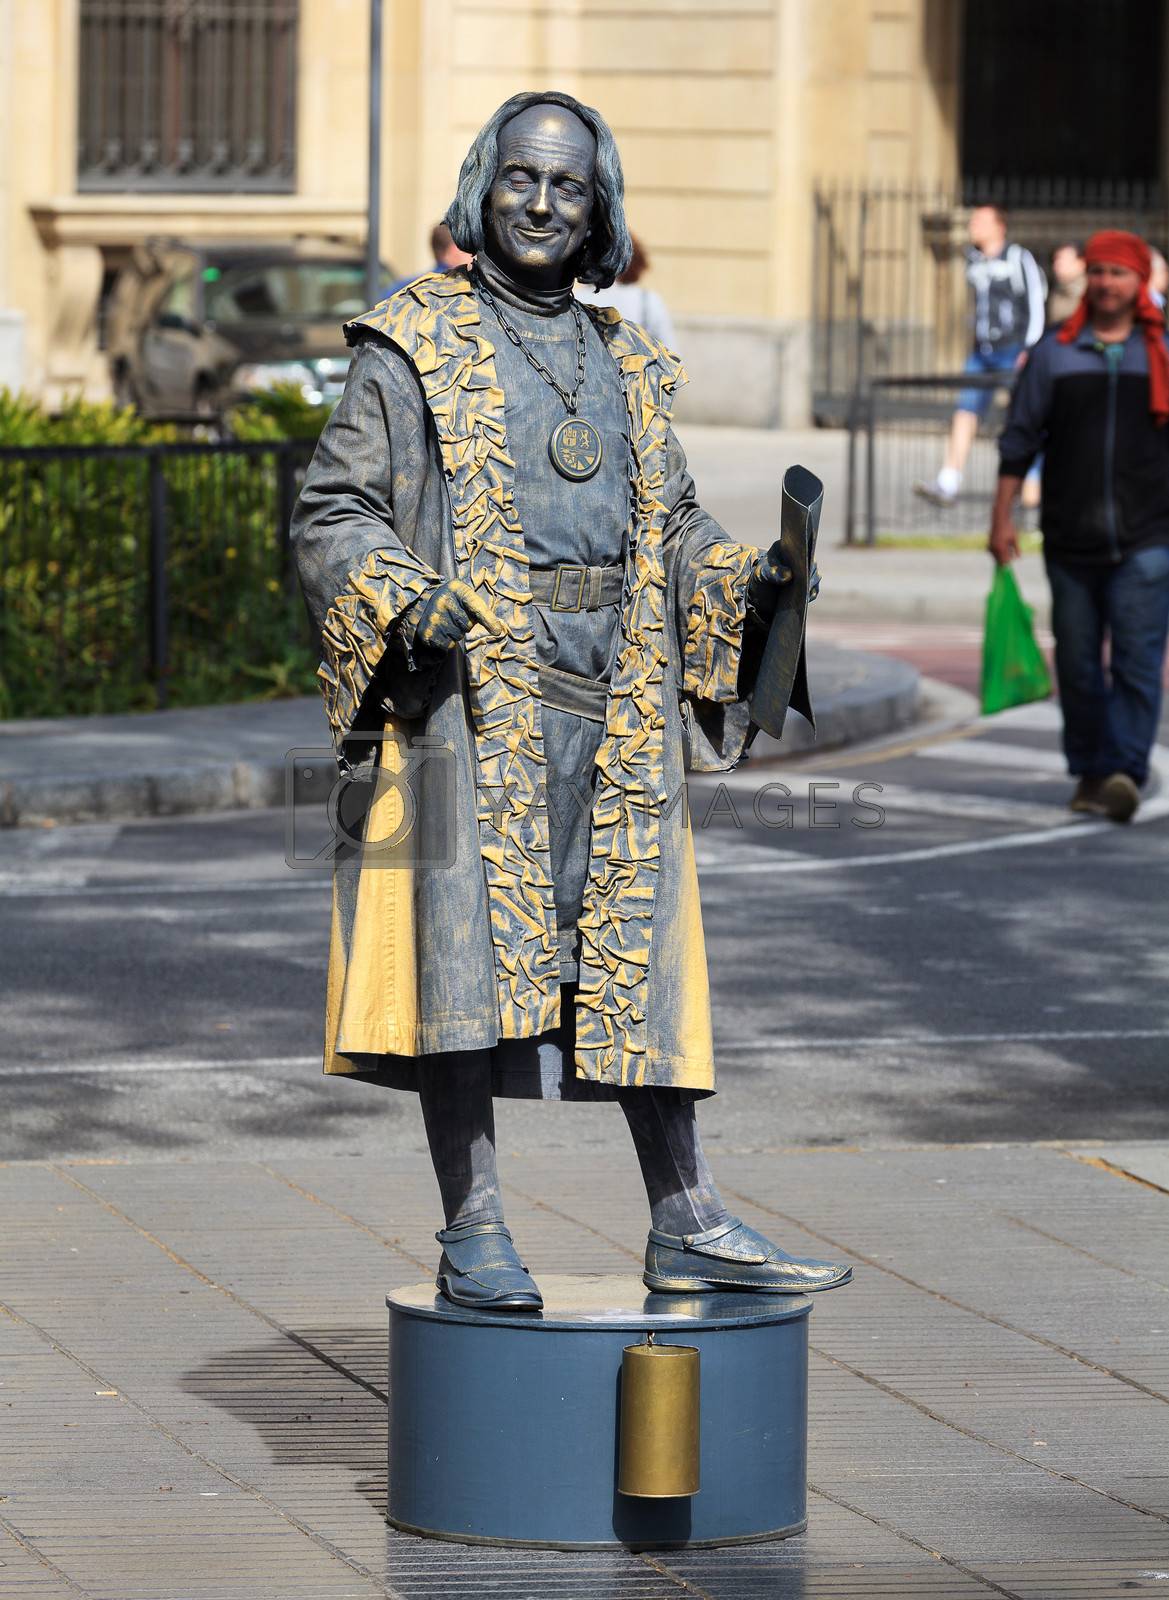 Royalty free image of Human statue dressed as Christopher Columbus by Nobilior